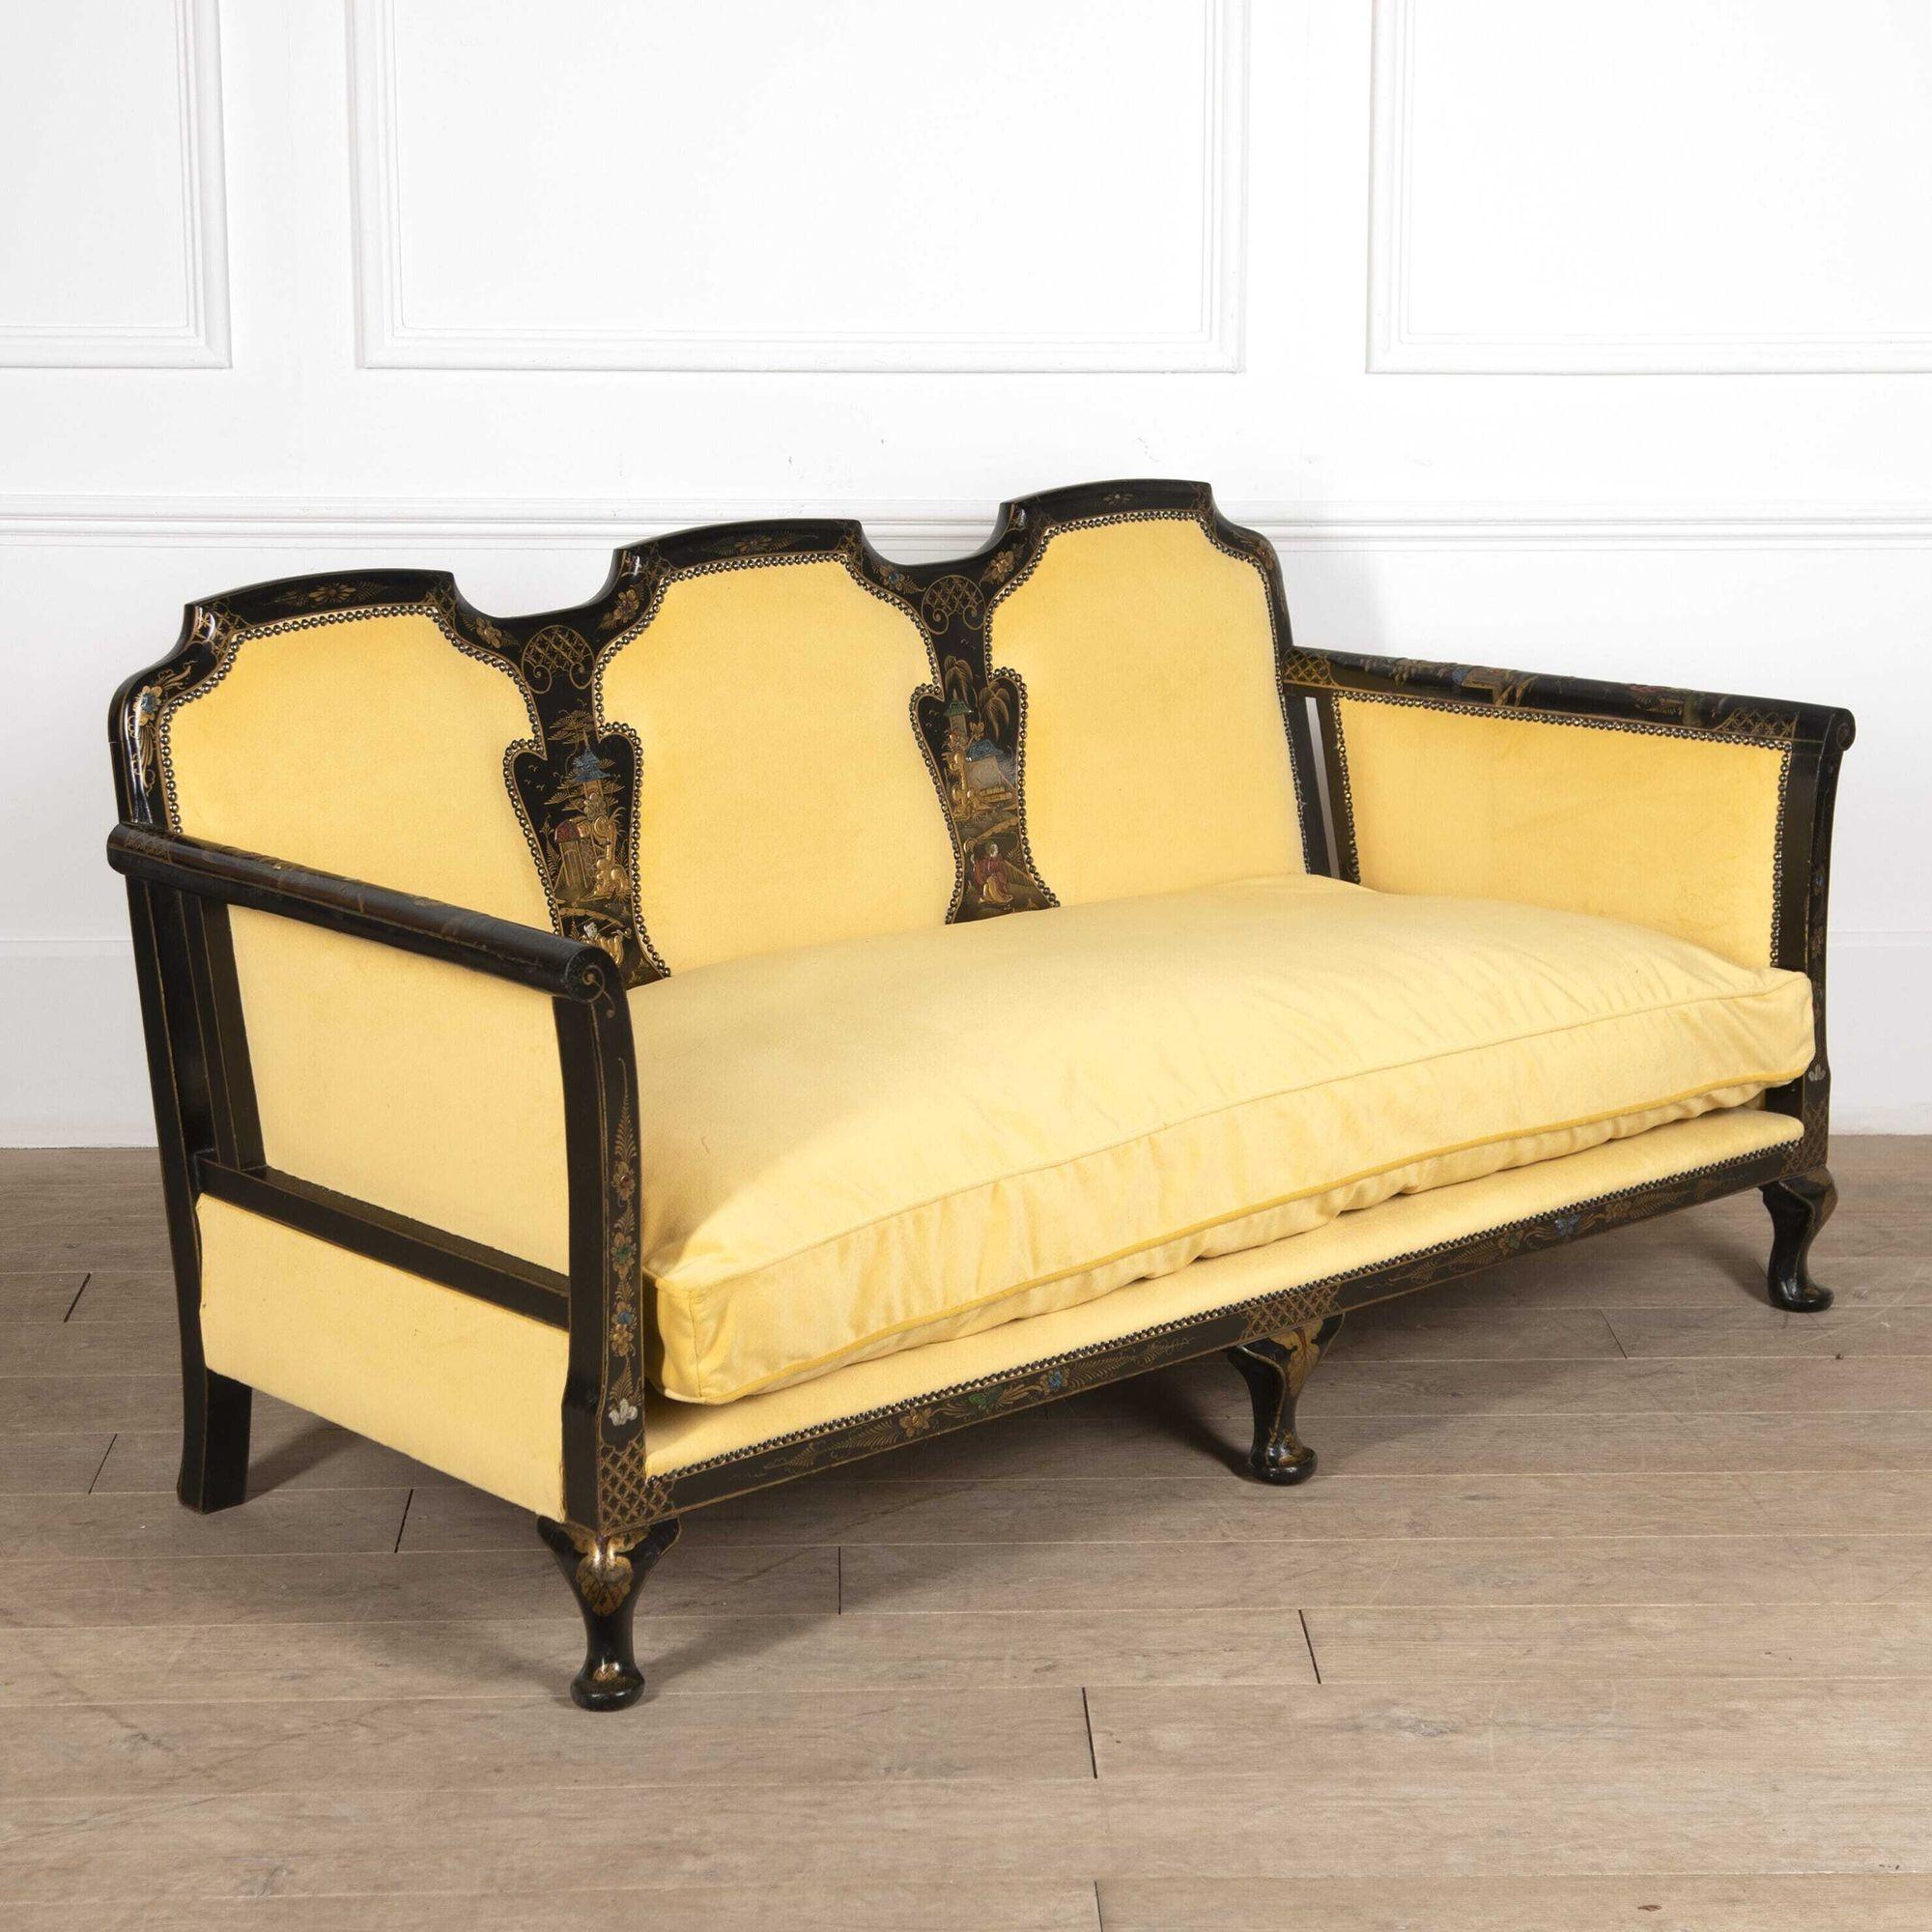 Fabulous 20th century English country house chinoiserie sofa.
This sofa is in the Chinoiserie style but is of English origin. The frame has been beautifully painted and ebonised to represent intricate Chinese designs that depict recognisable